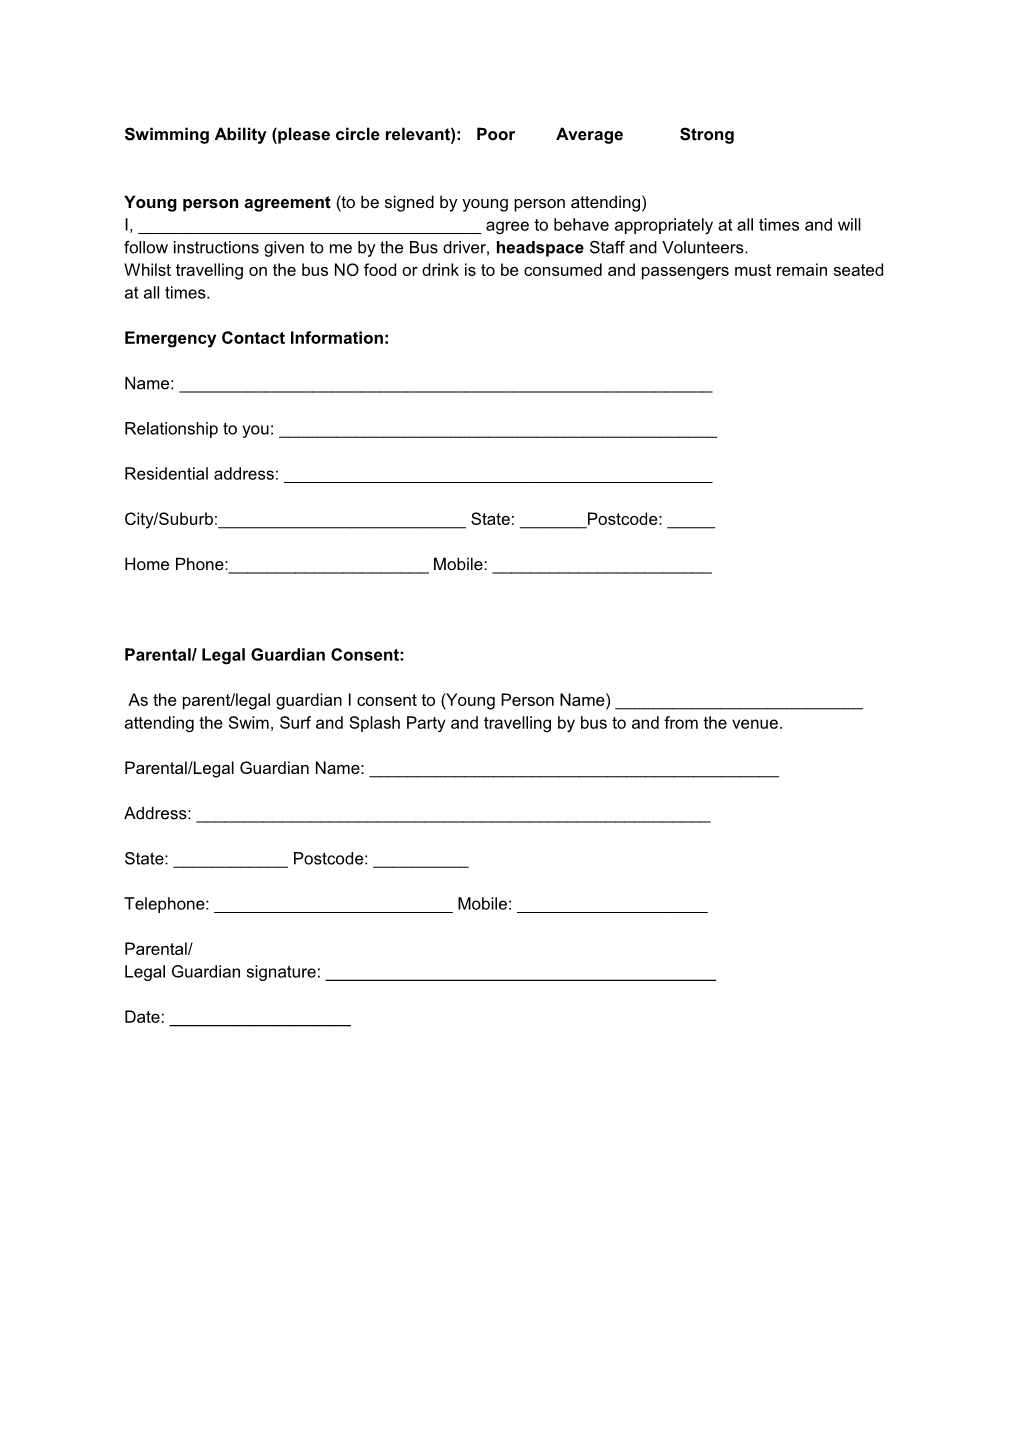 CONSENT FORM FOR: Headspace Cairns Swim, Surf and Splash Party